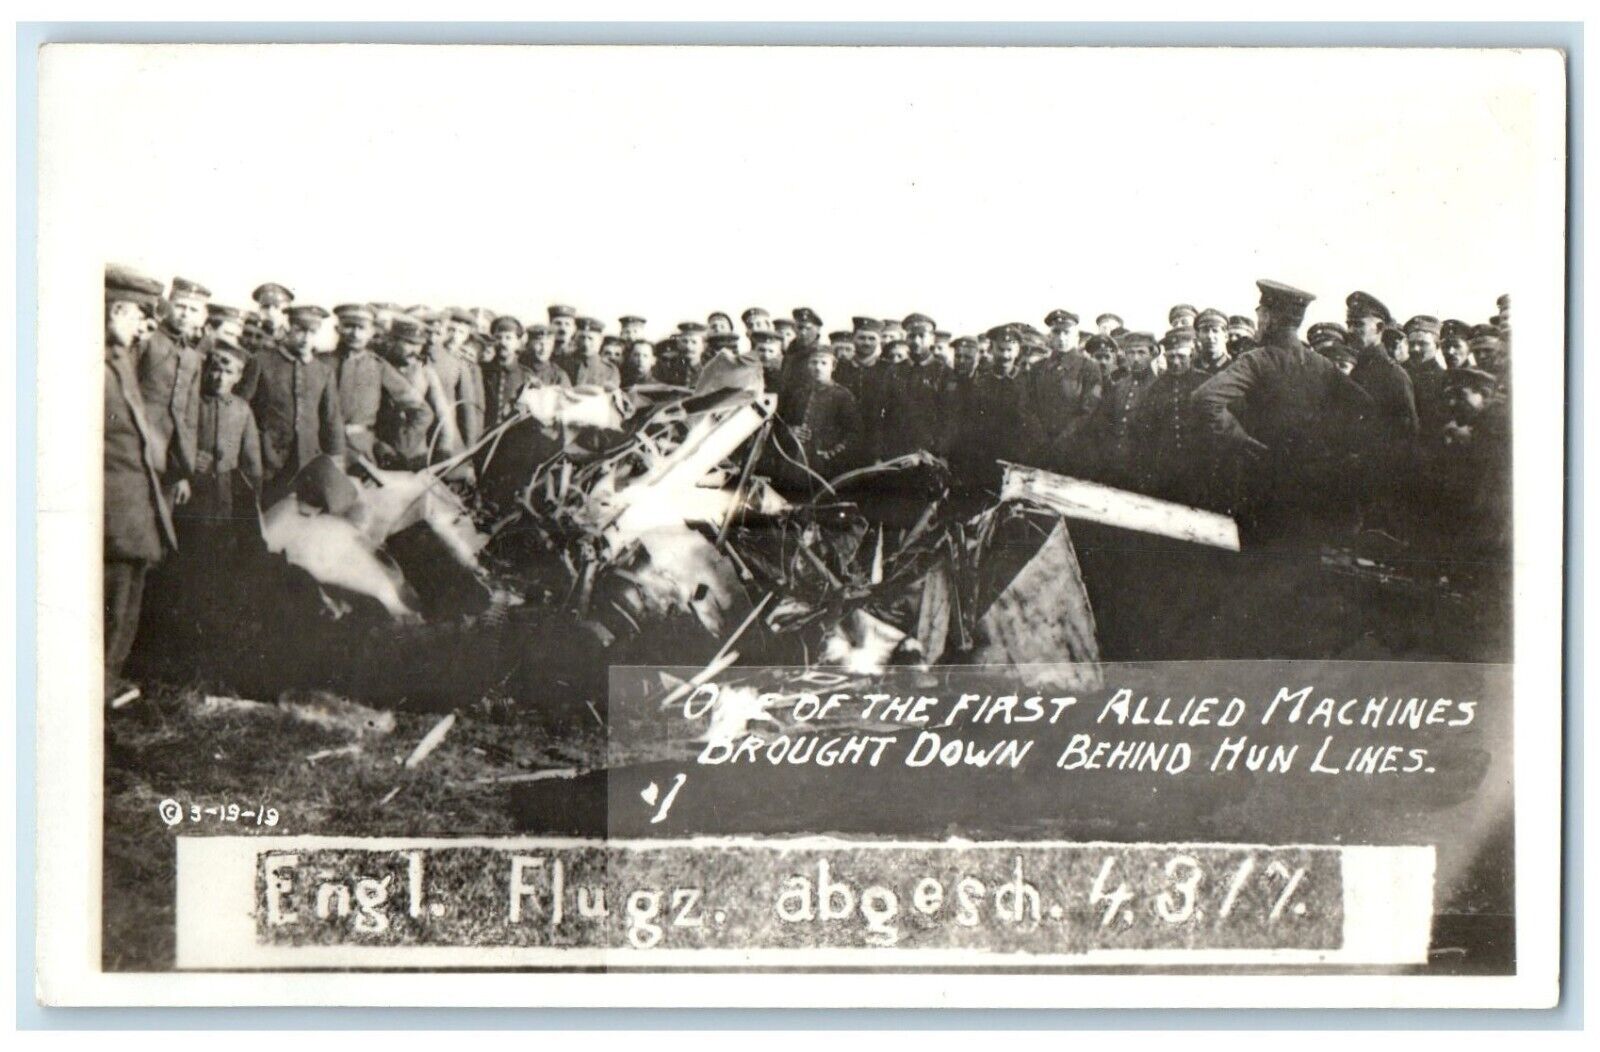 First Allied Machines Brought Down Behind Hun Lines WWI RPPC Photo Postcard